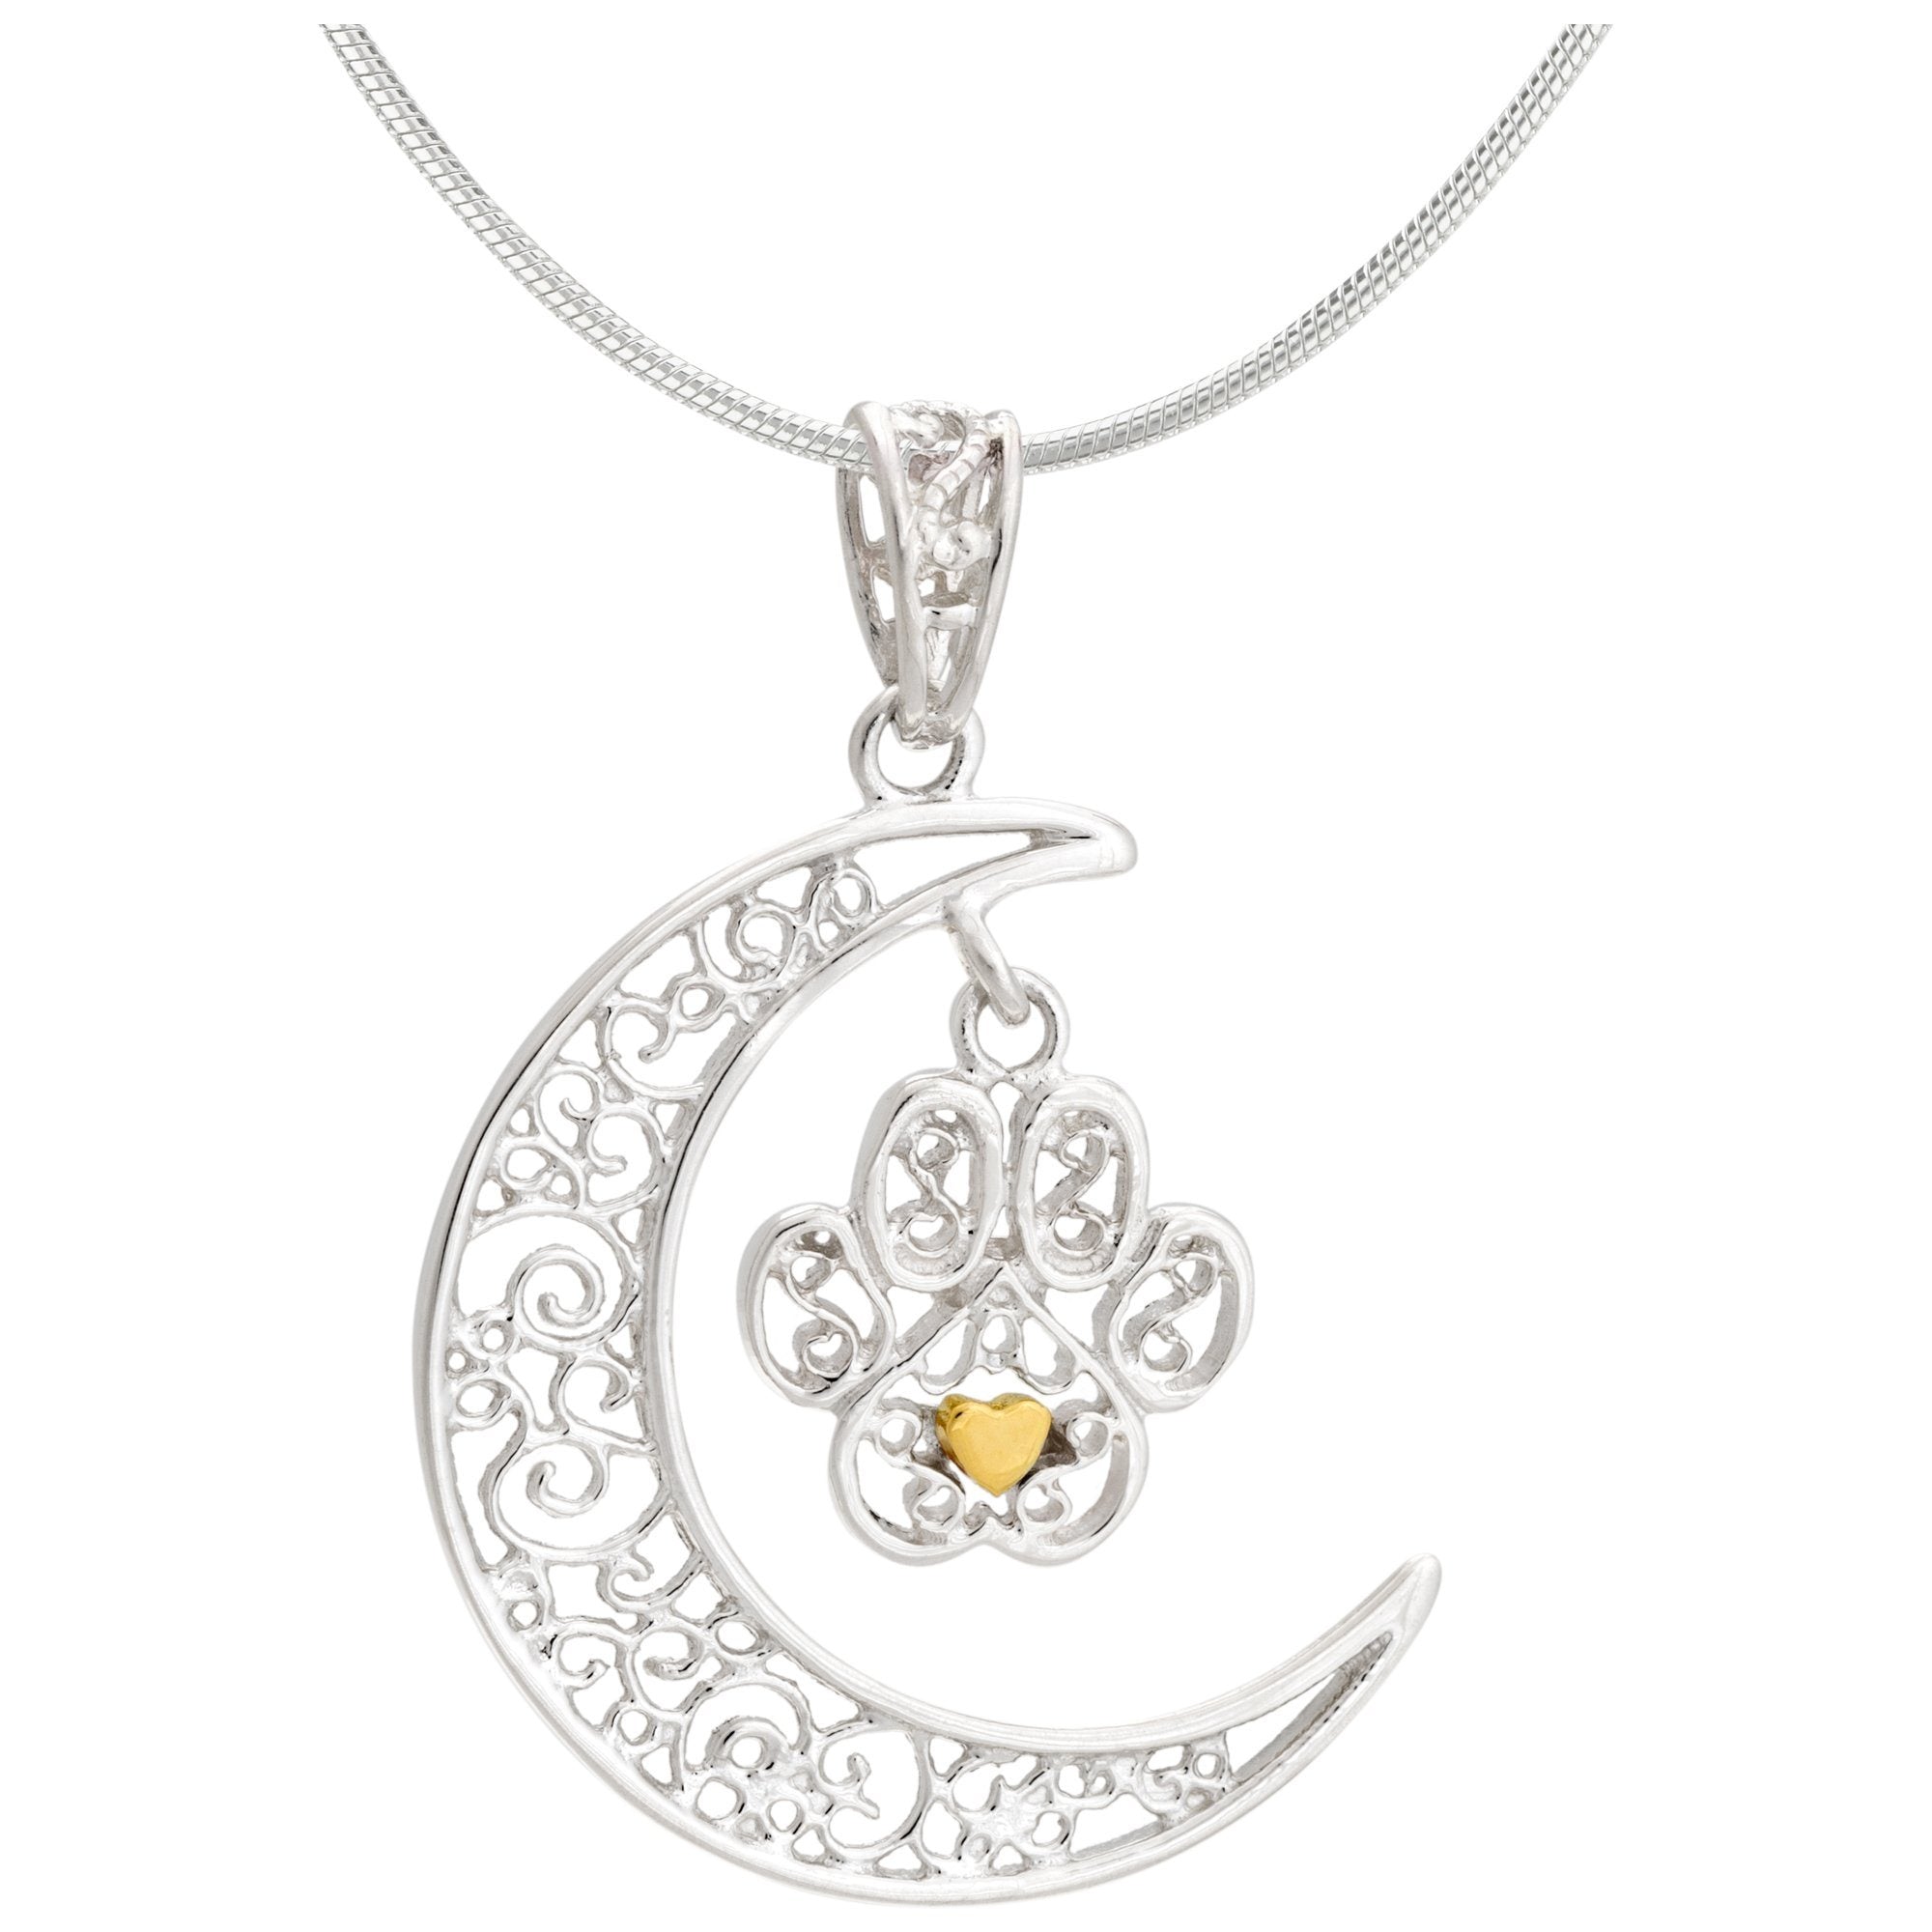 Filigree Moonlight Paw Sterling Necklace - With Sterling Cable Chain